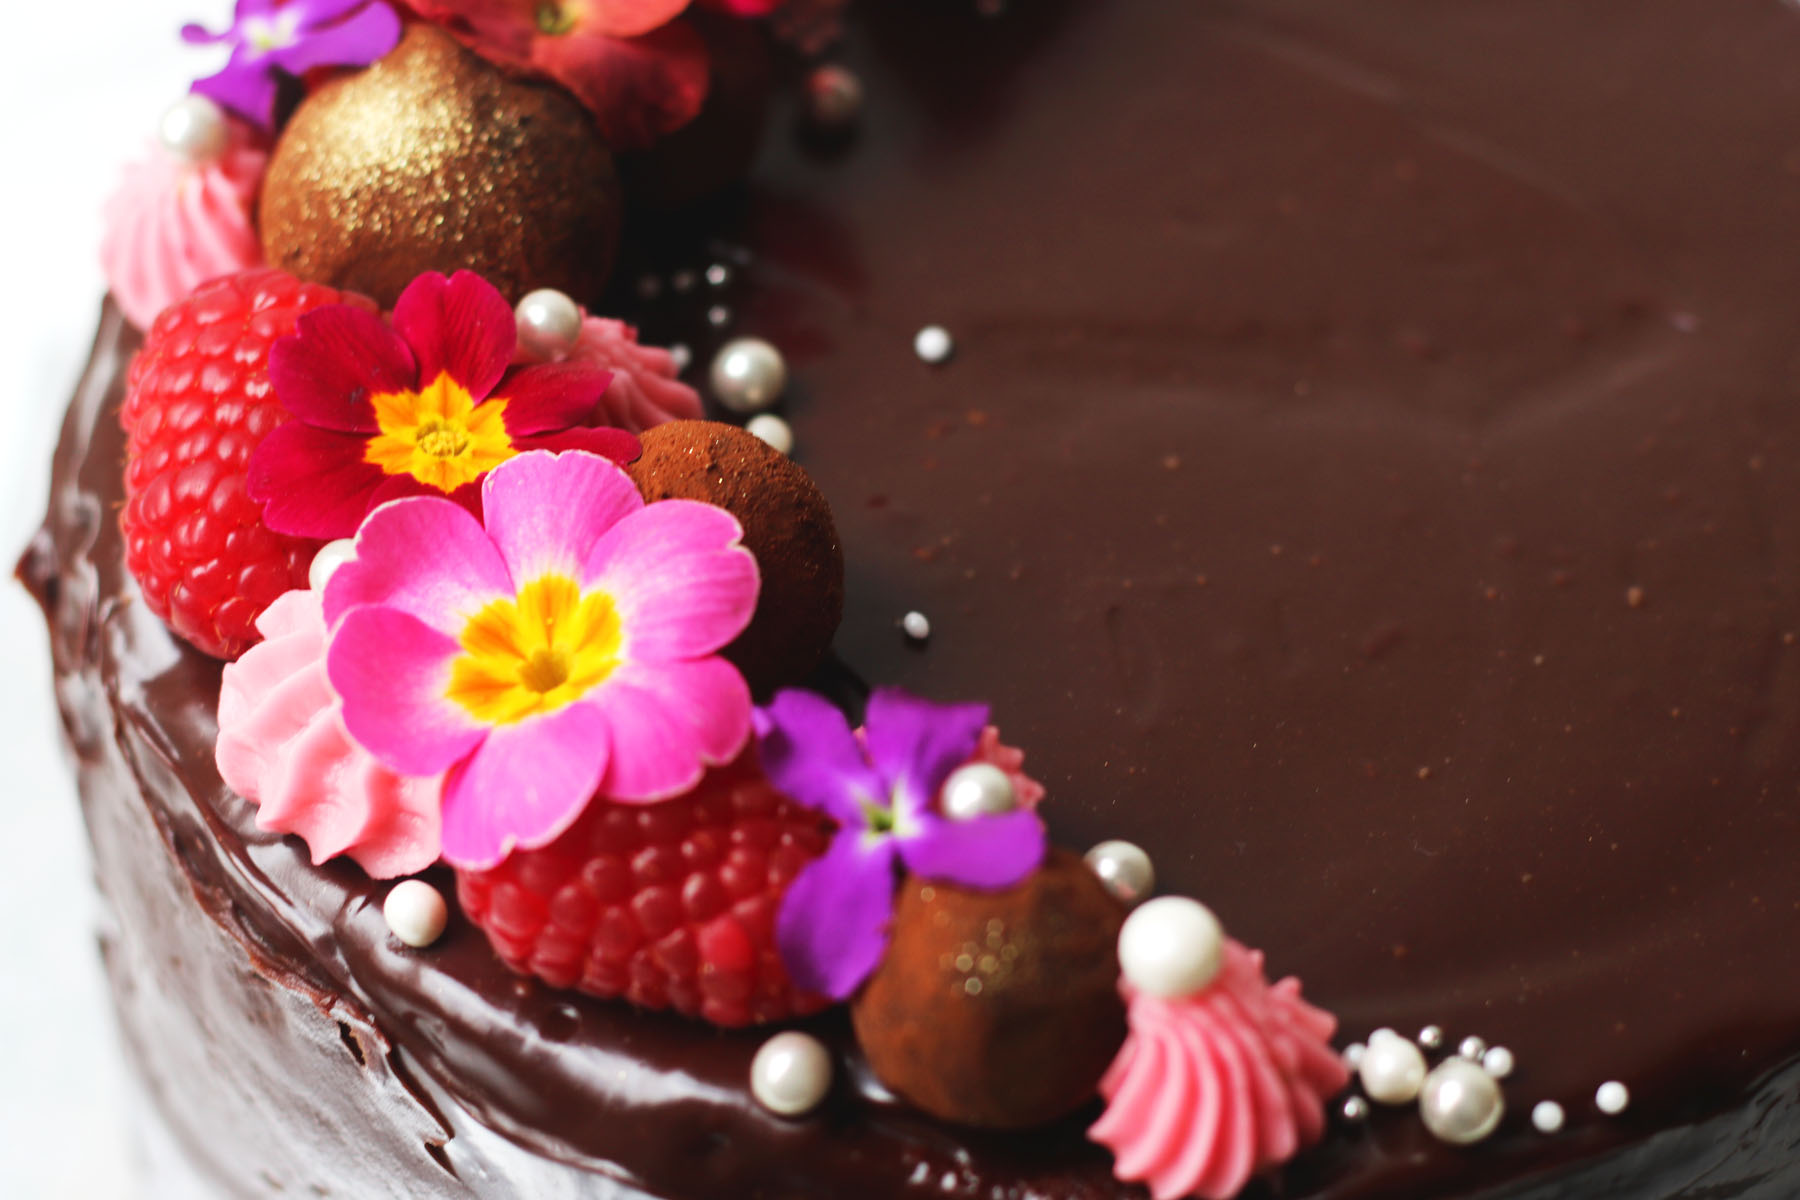 Close up of raspberries and edible flowers on top of a chocolate ganache covered cake